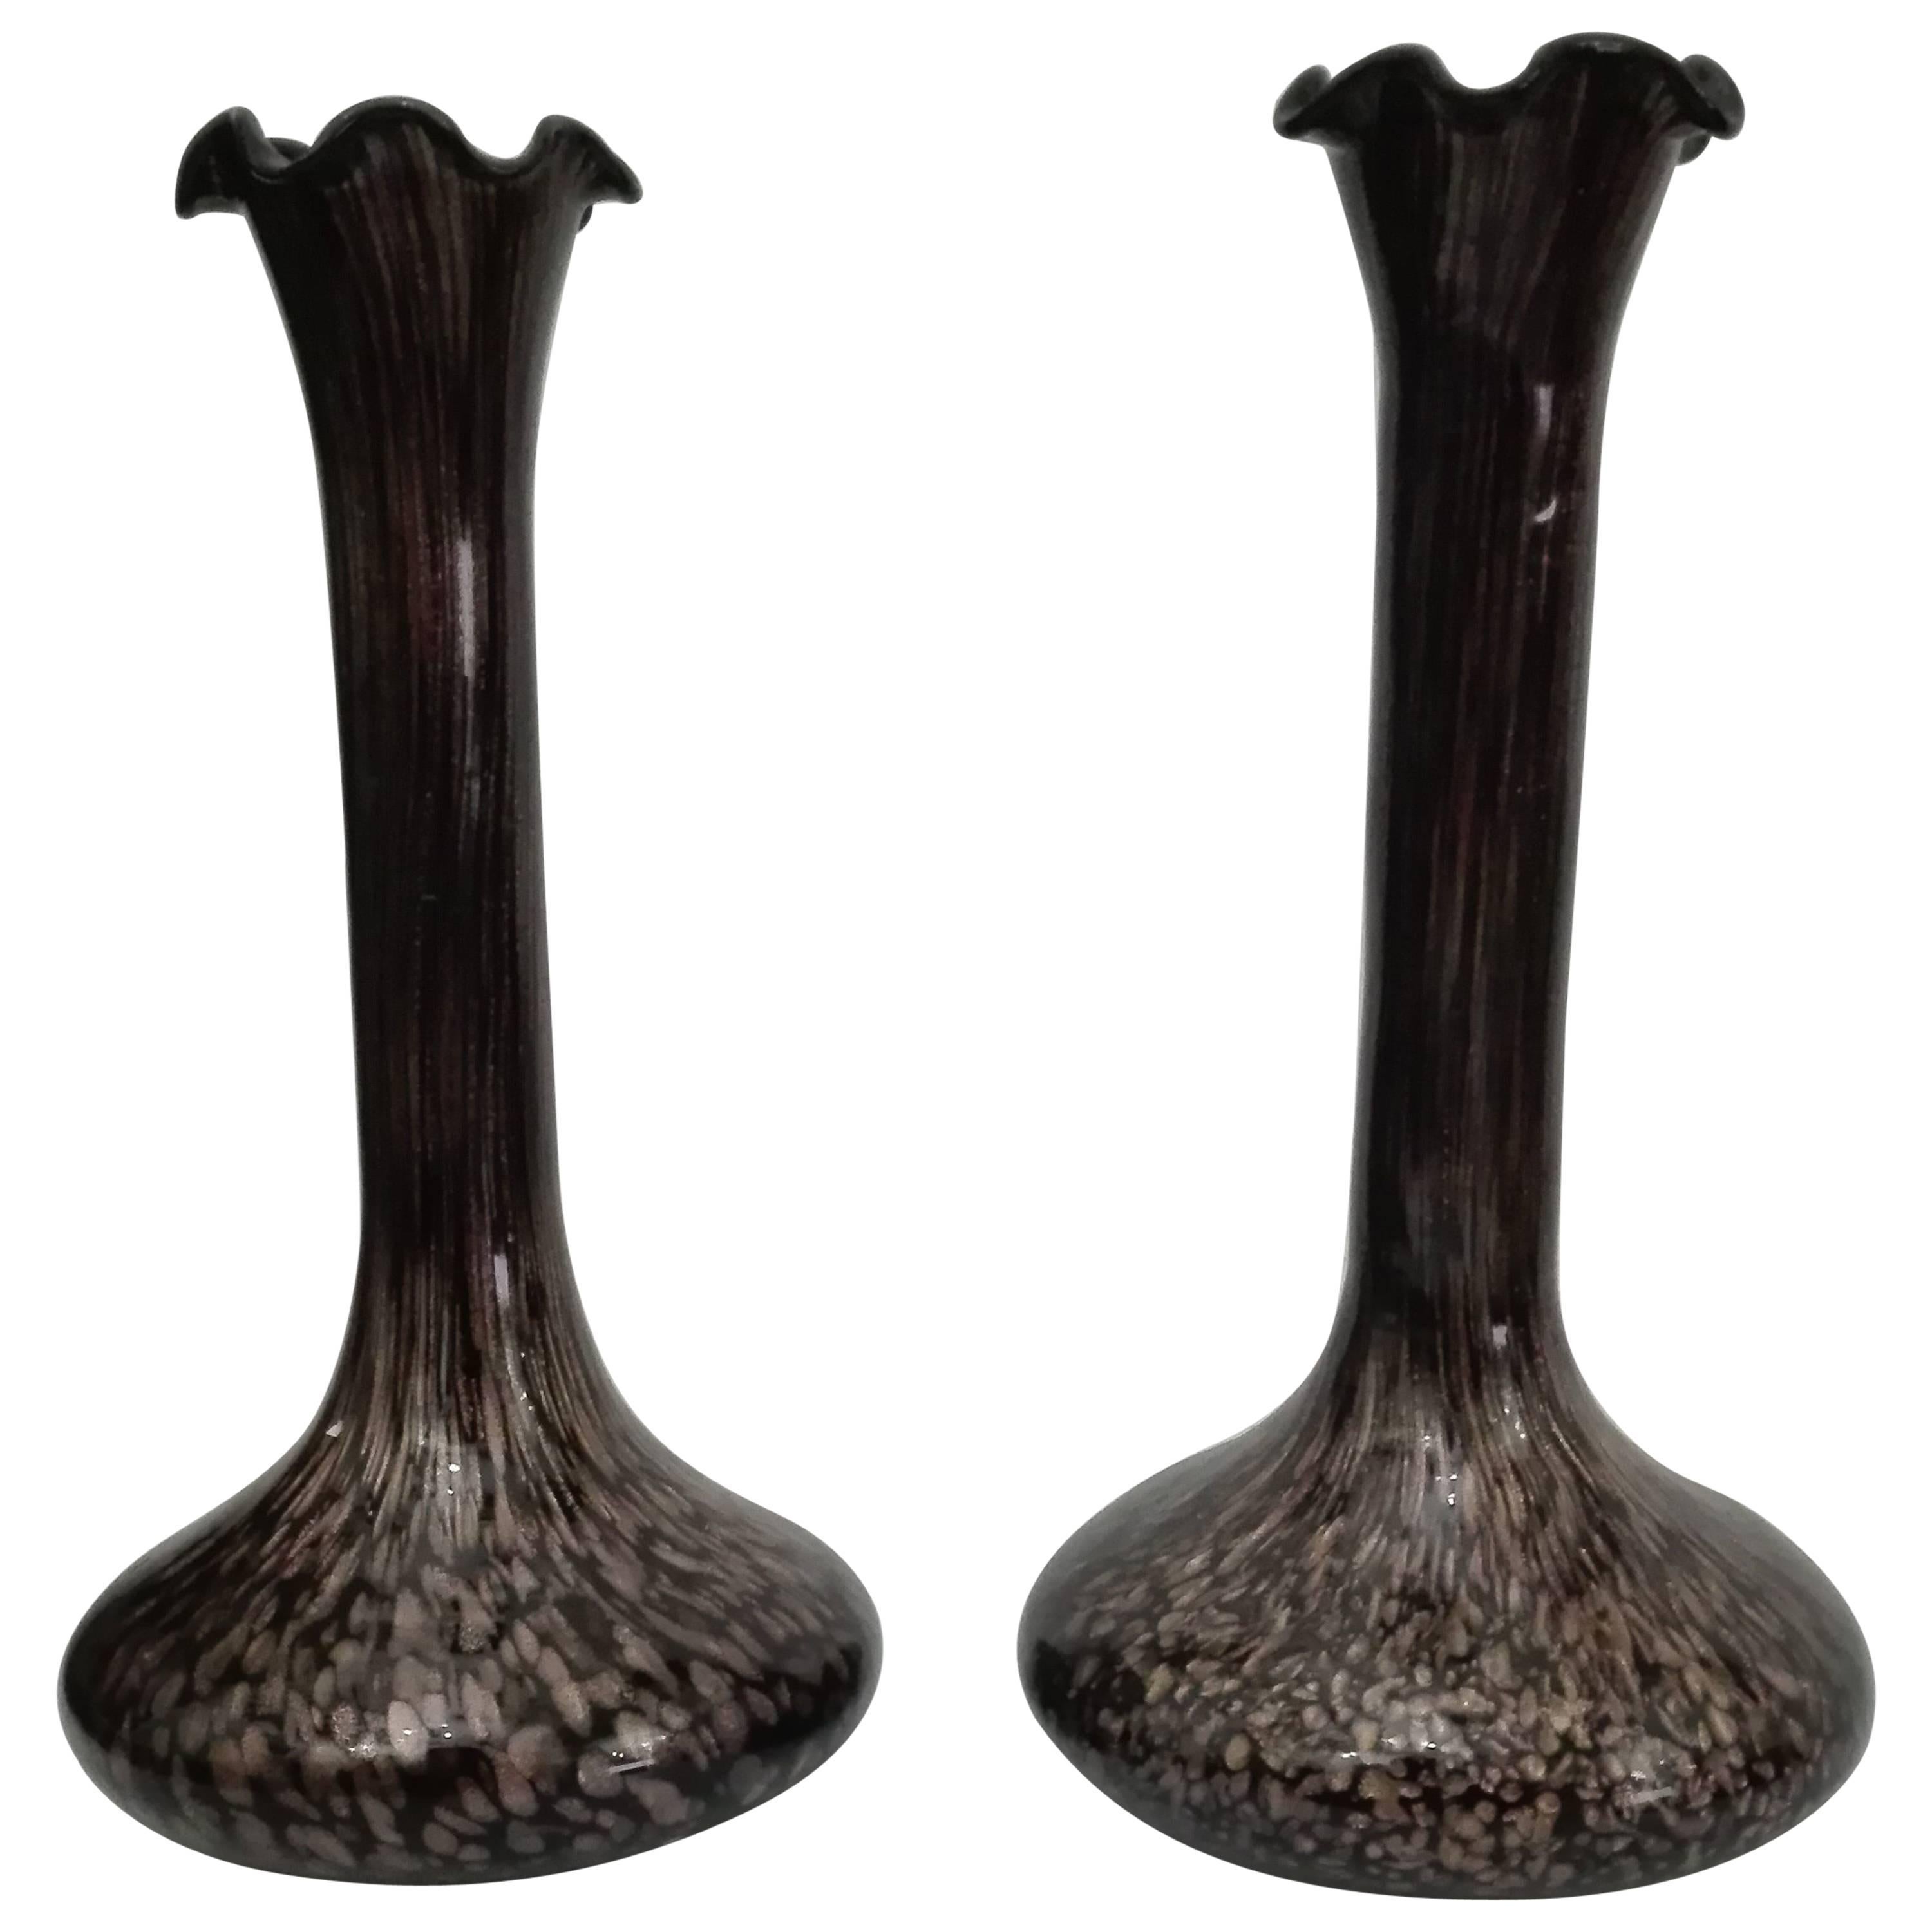 Pair of Vases for a Flower Murano Glass